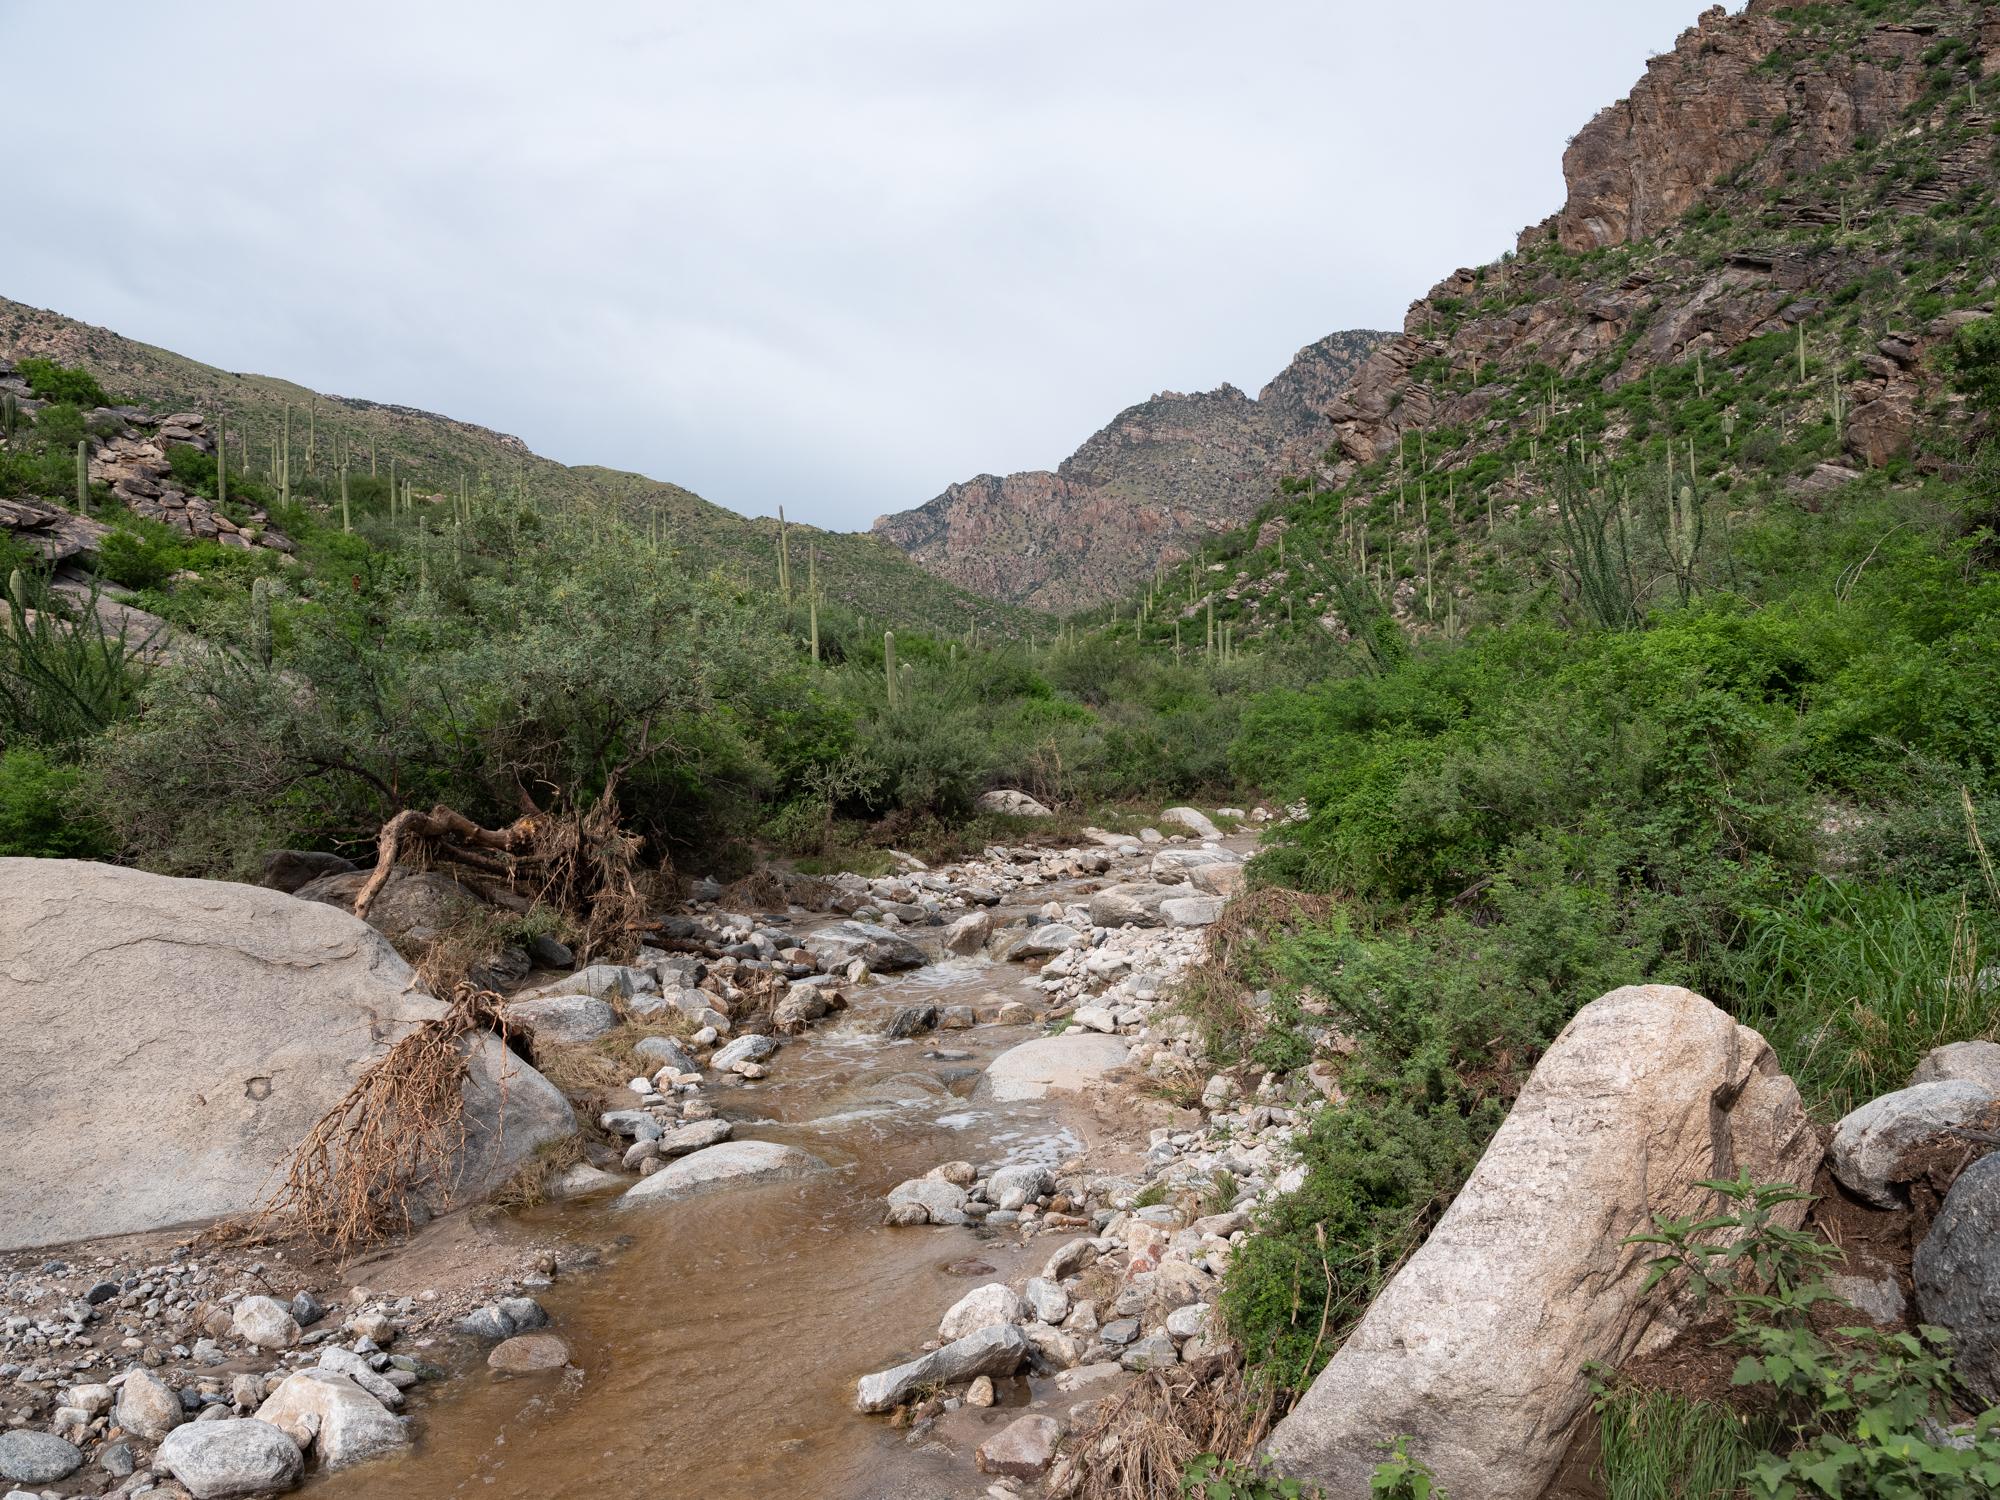 New Arizonans - HuffPost - With lush greenery and water flowing in the river wash,...